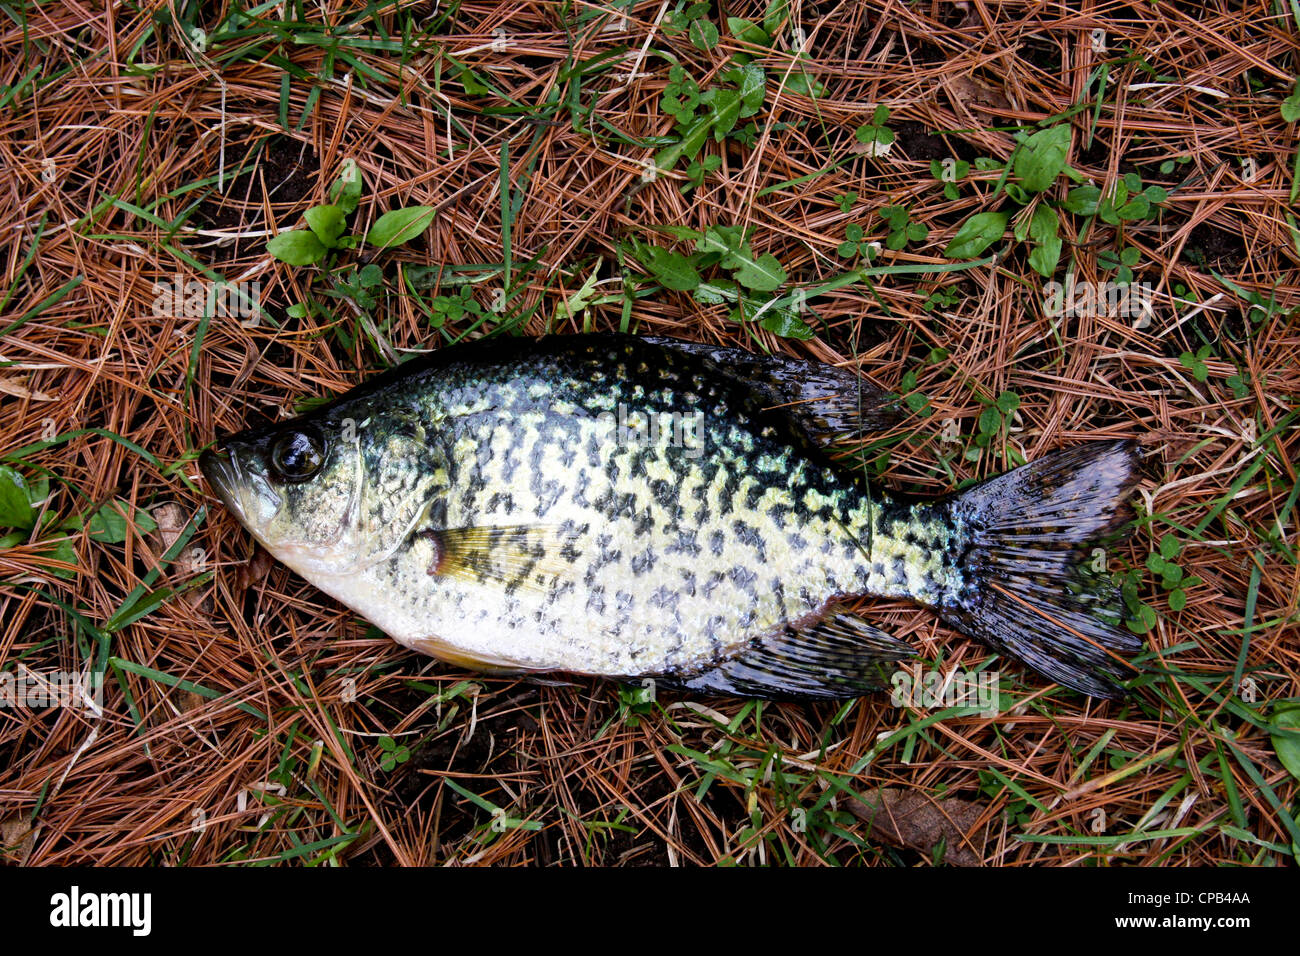 crappie fish close up laying on a bed of pine needles and leaves Stock Photo